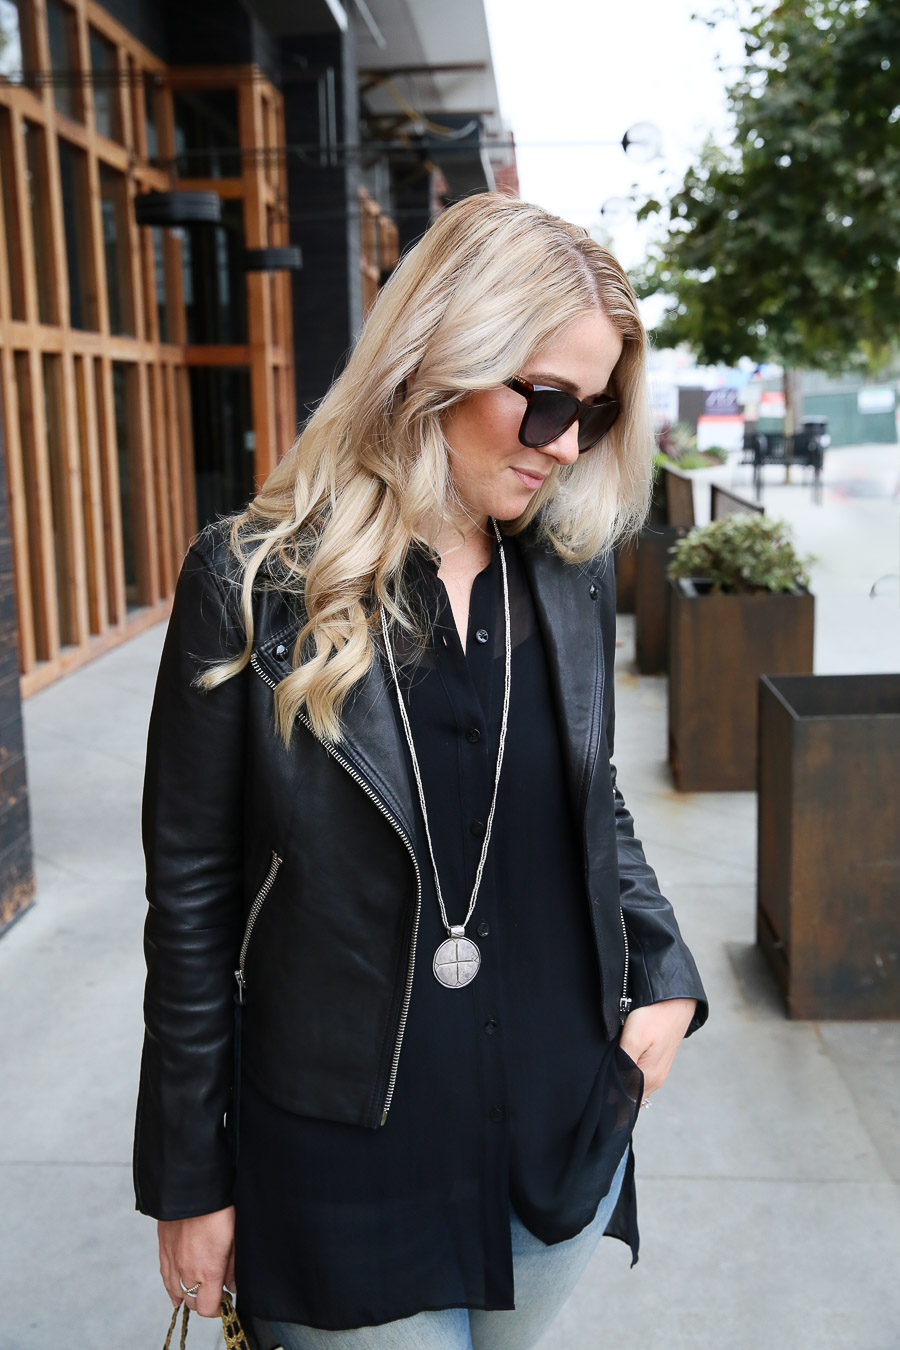 How to Wear Long Shirts w. Leather Jacket and Jeans - Leather Jacket Outfits